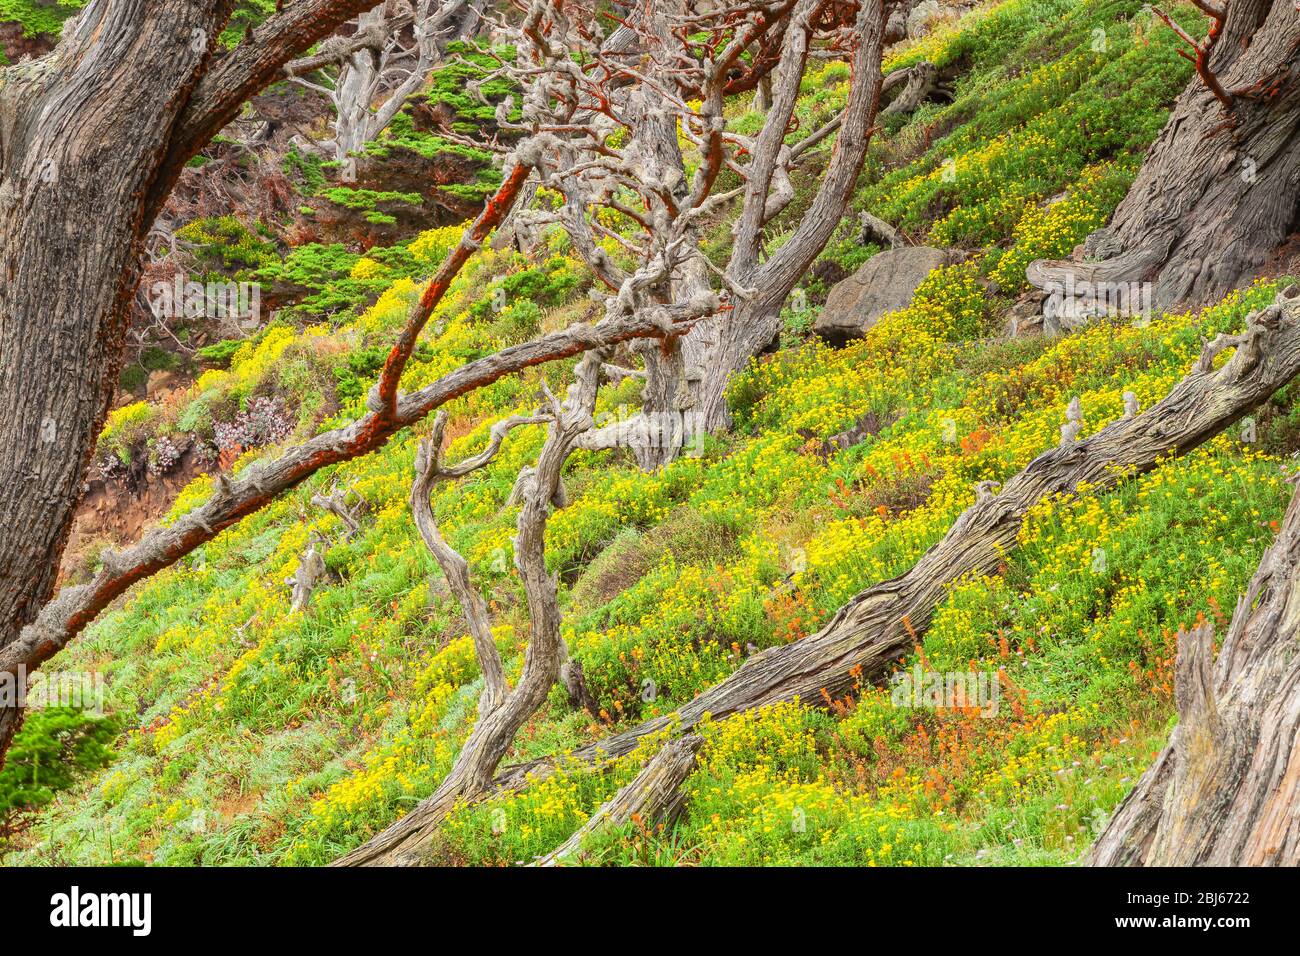 Seaside wooly sunflowers Eriophyllum staechadifolium bloom on the hill slope along the California coast at Point Lobos State Natural Reserve, USA. Stock Photo